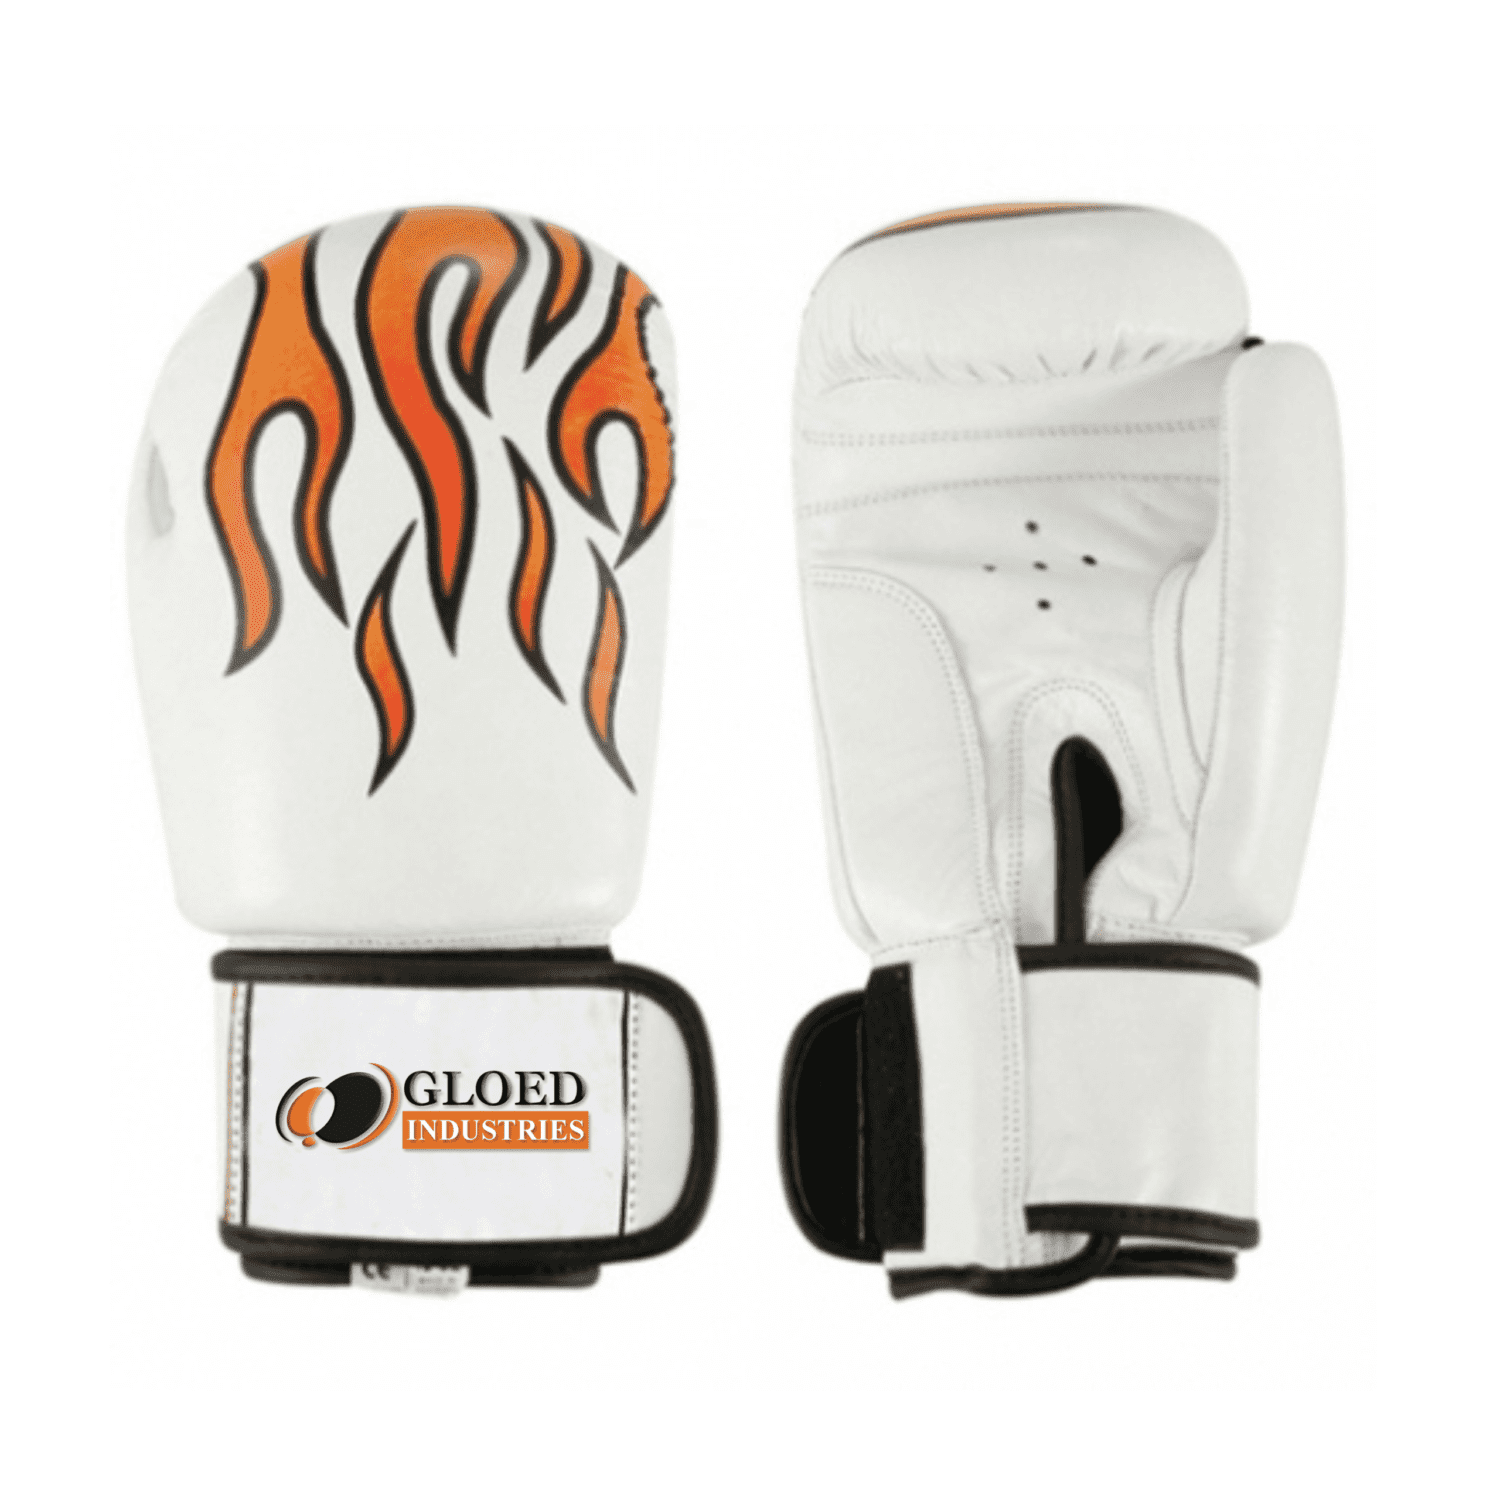 White custom boxing gloves with embroidered logo.